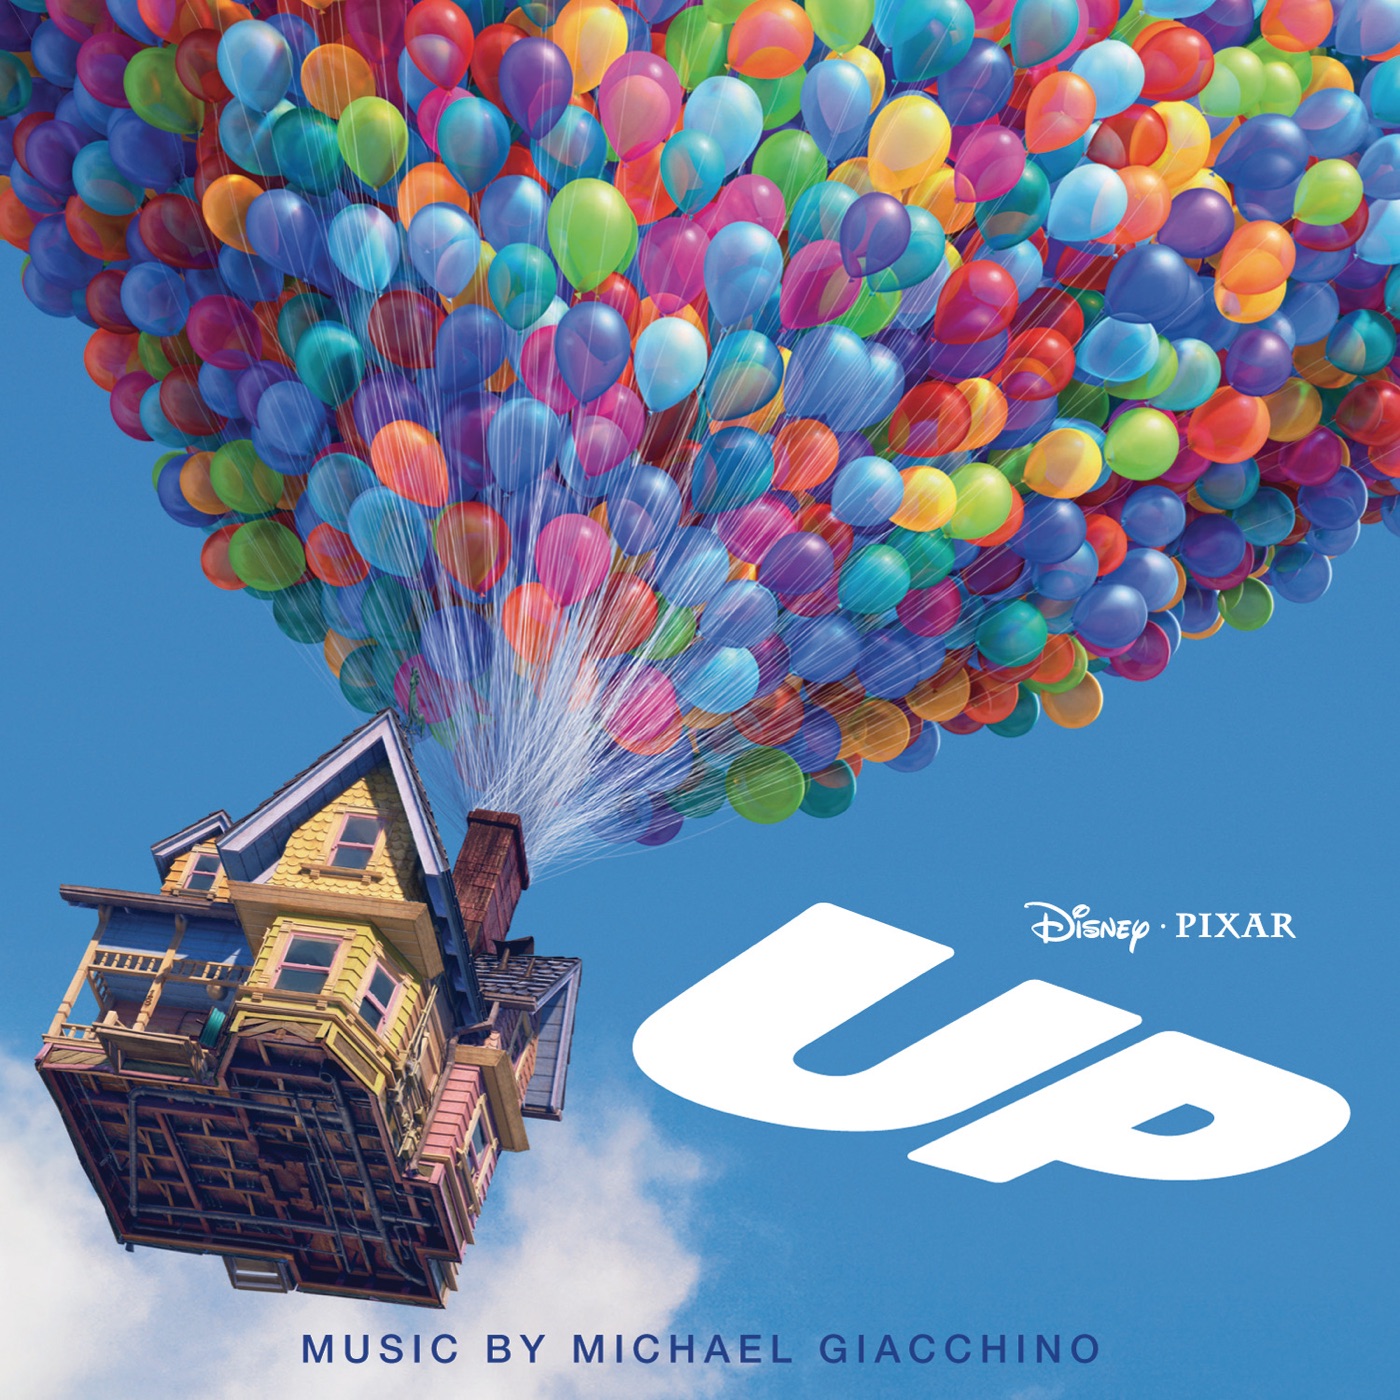 Up by Michael Giacchino